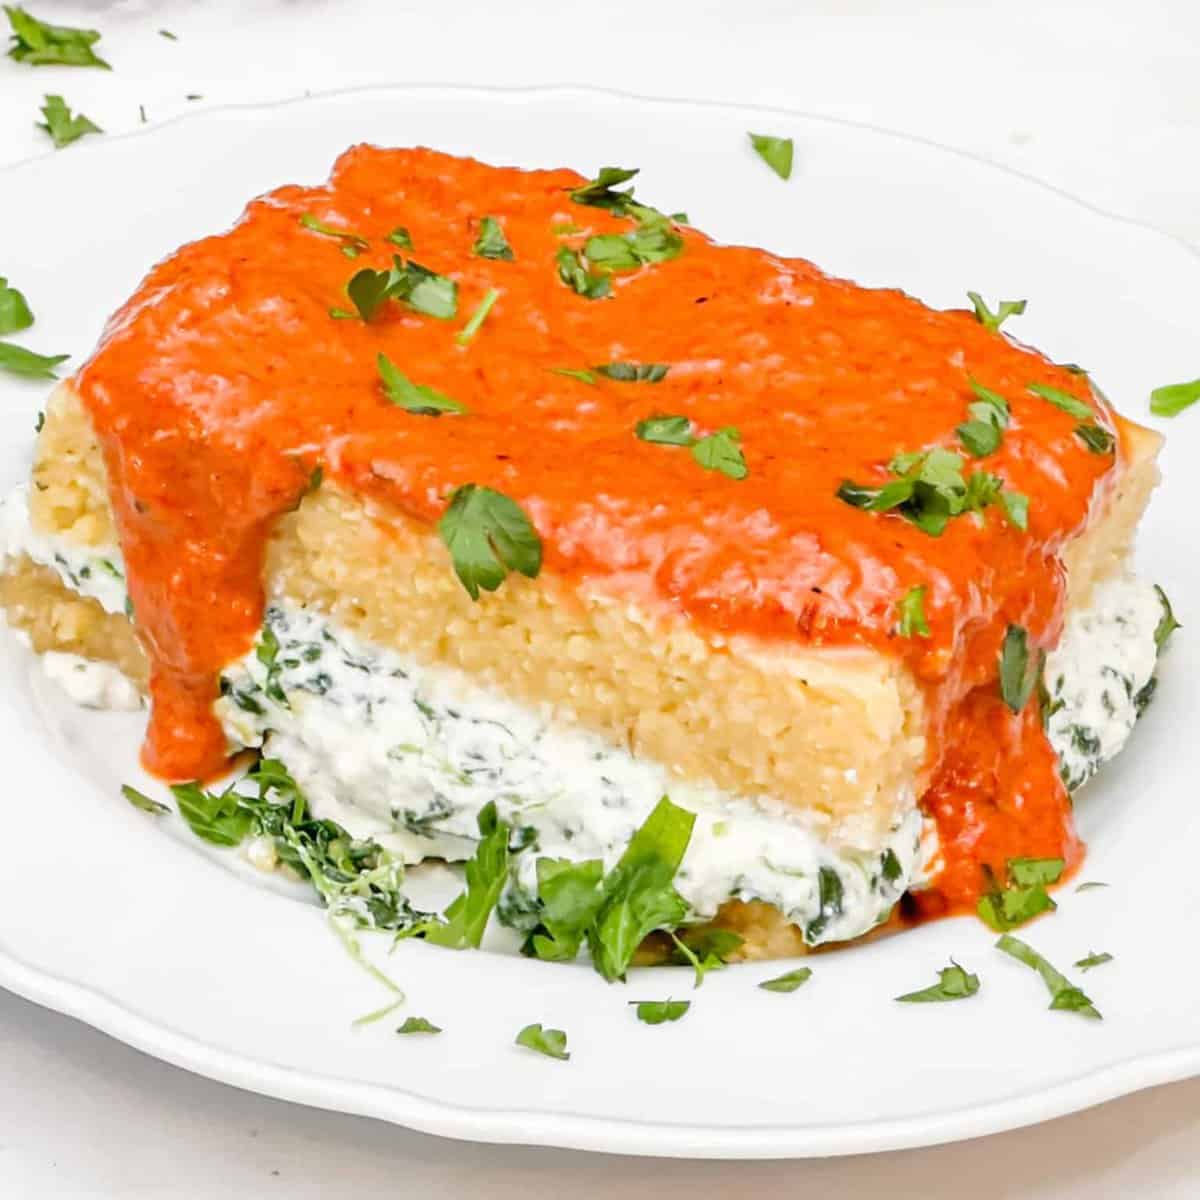 Pepper Recipes: Stuffed Polenta with Roasted Red Pepper Sauce from Jerry James Stone